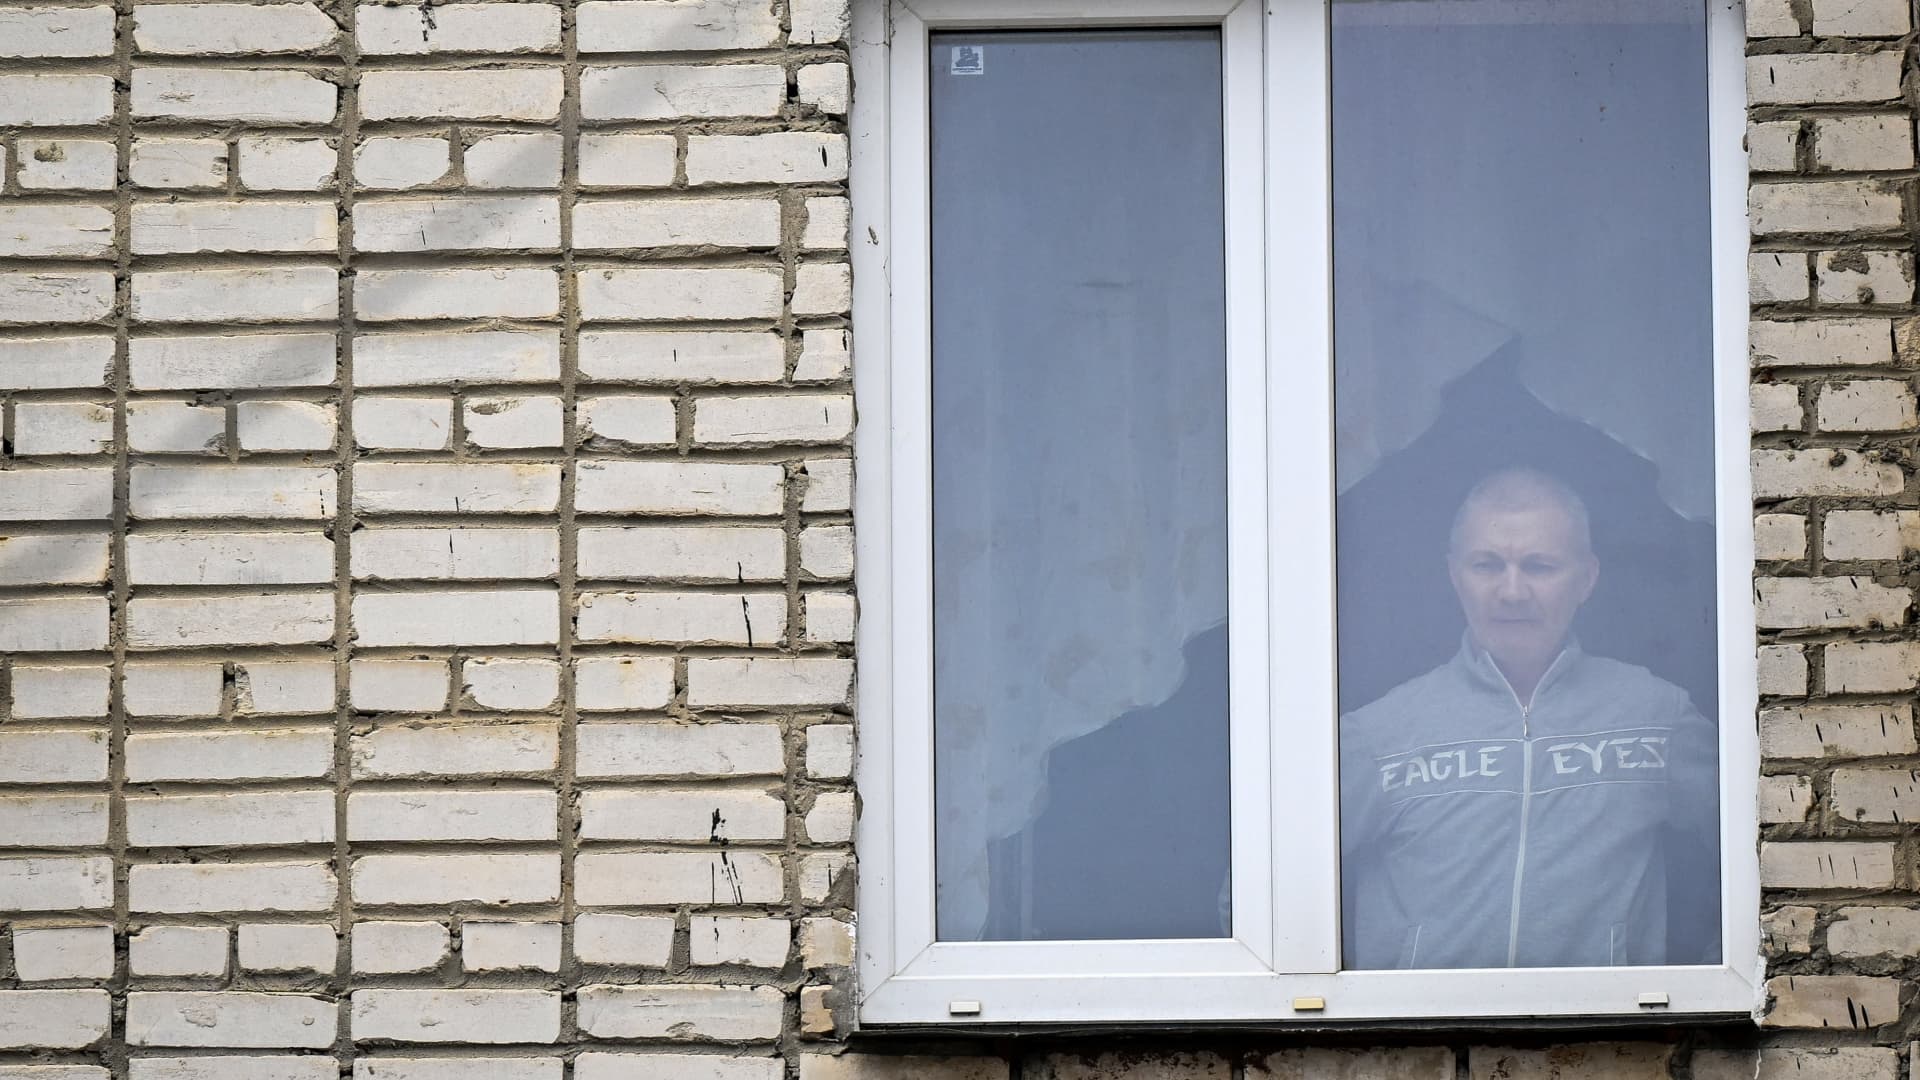 Alexei Moskalyov, 54, a single parent of Maria Moskalyova, the 13-year-old girl who drew a picture critical of Moscow's military campaign in Ukraine at school in April last year, looks out through the window of his flat after he was placed under house for repeating Ukraine posts discrediting the Russian army, in the town of Yefremov in the Tula region on March 23, 2023.